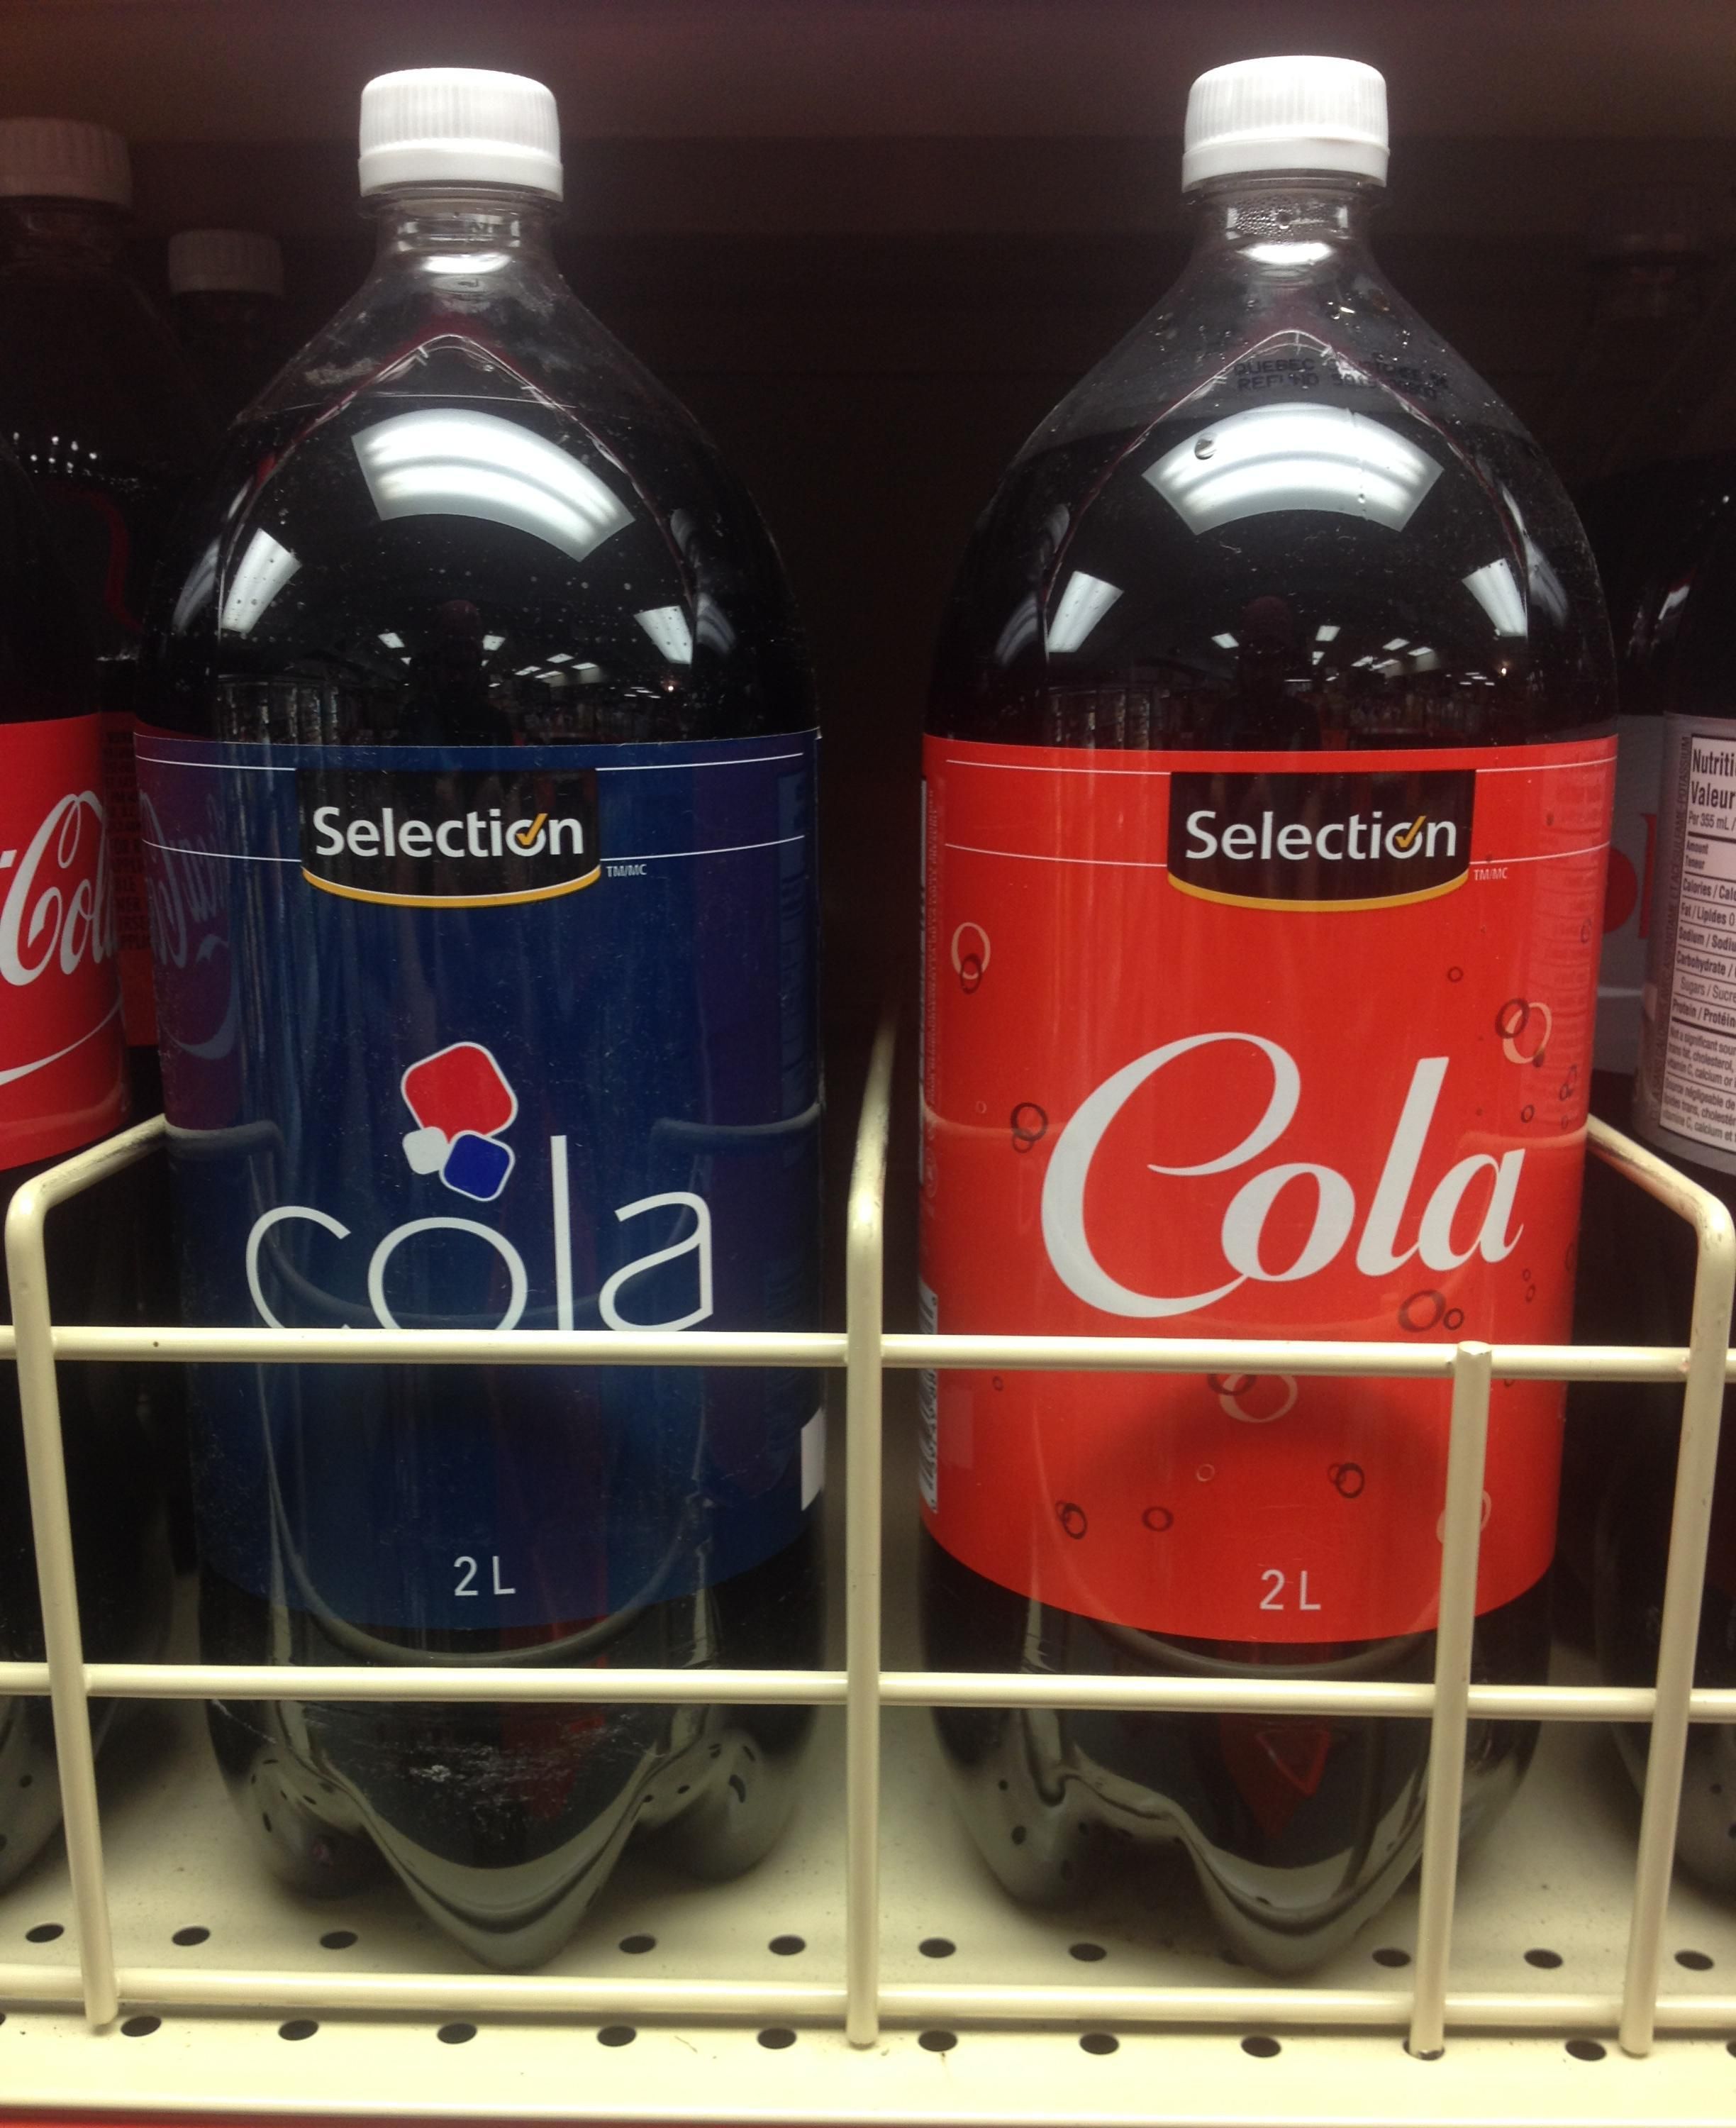 Local "No-name"/"house brand" cola still allows you to be a loyal Pepsi or Coke drinker.